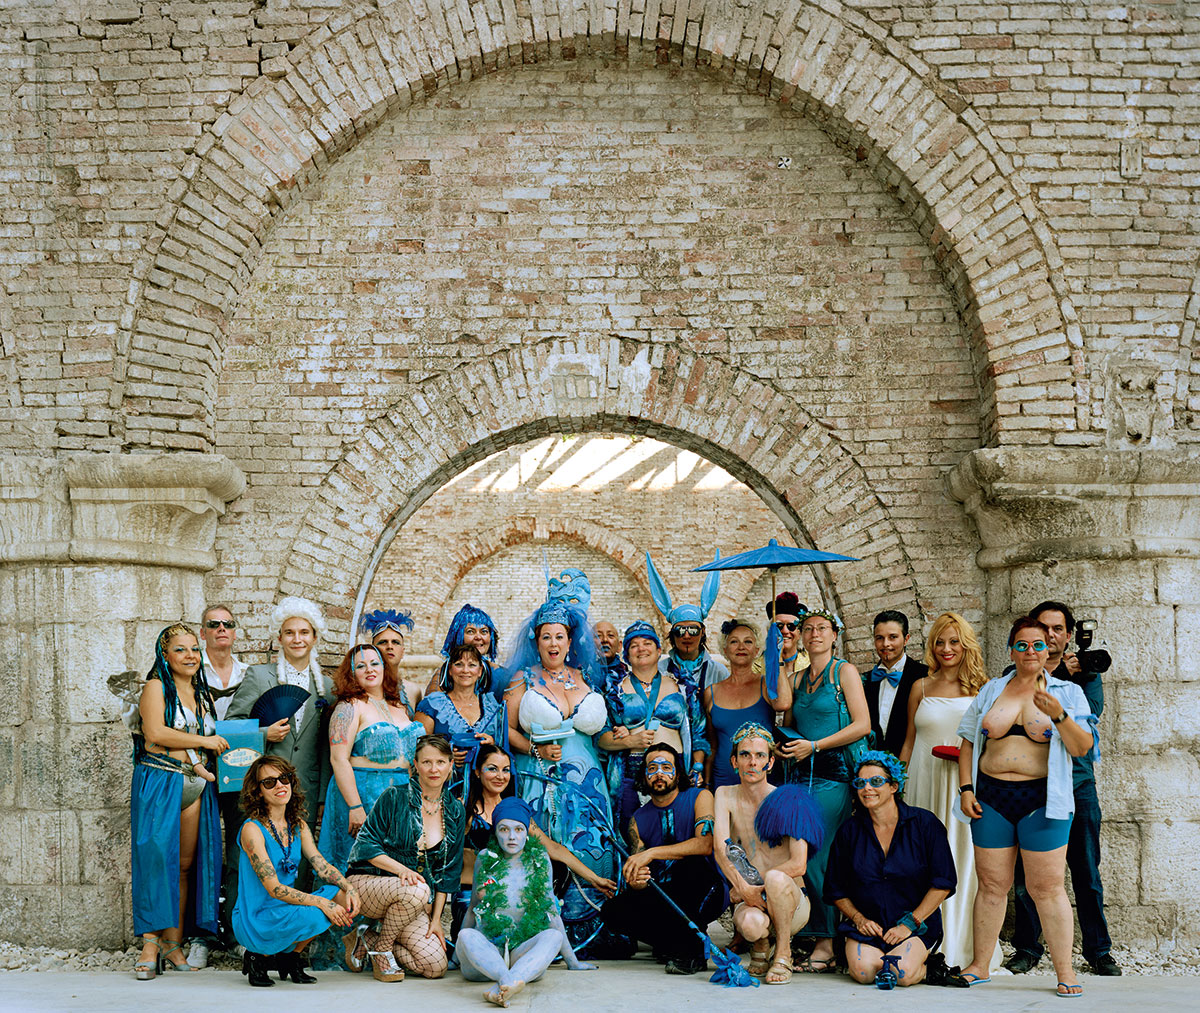 Elizabeth Stephens and Annie M. Sprinkle (pictured centre) The Love Art Laboratory (detail, Blue Wedding to the Sea – an Ecosexual Performance Art Wedding 2009), 2004 – 11 Action. As featured in Art and Queer Culture